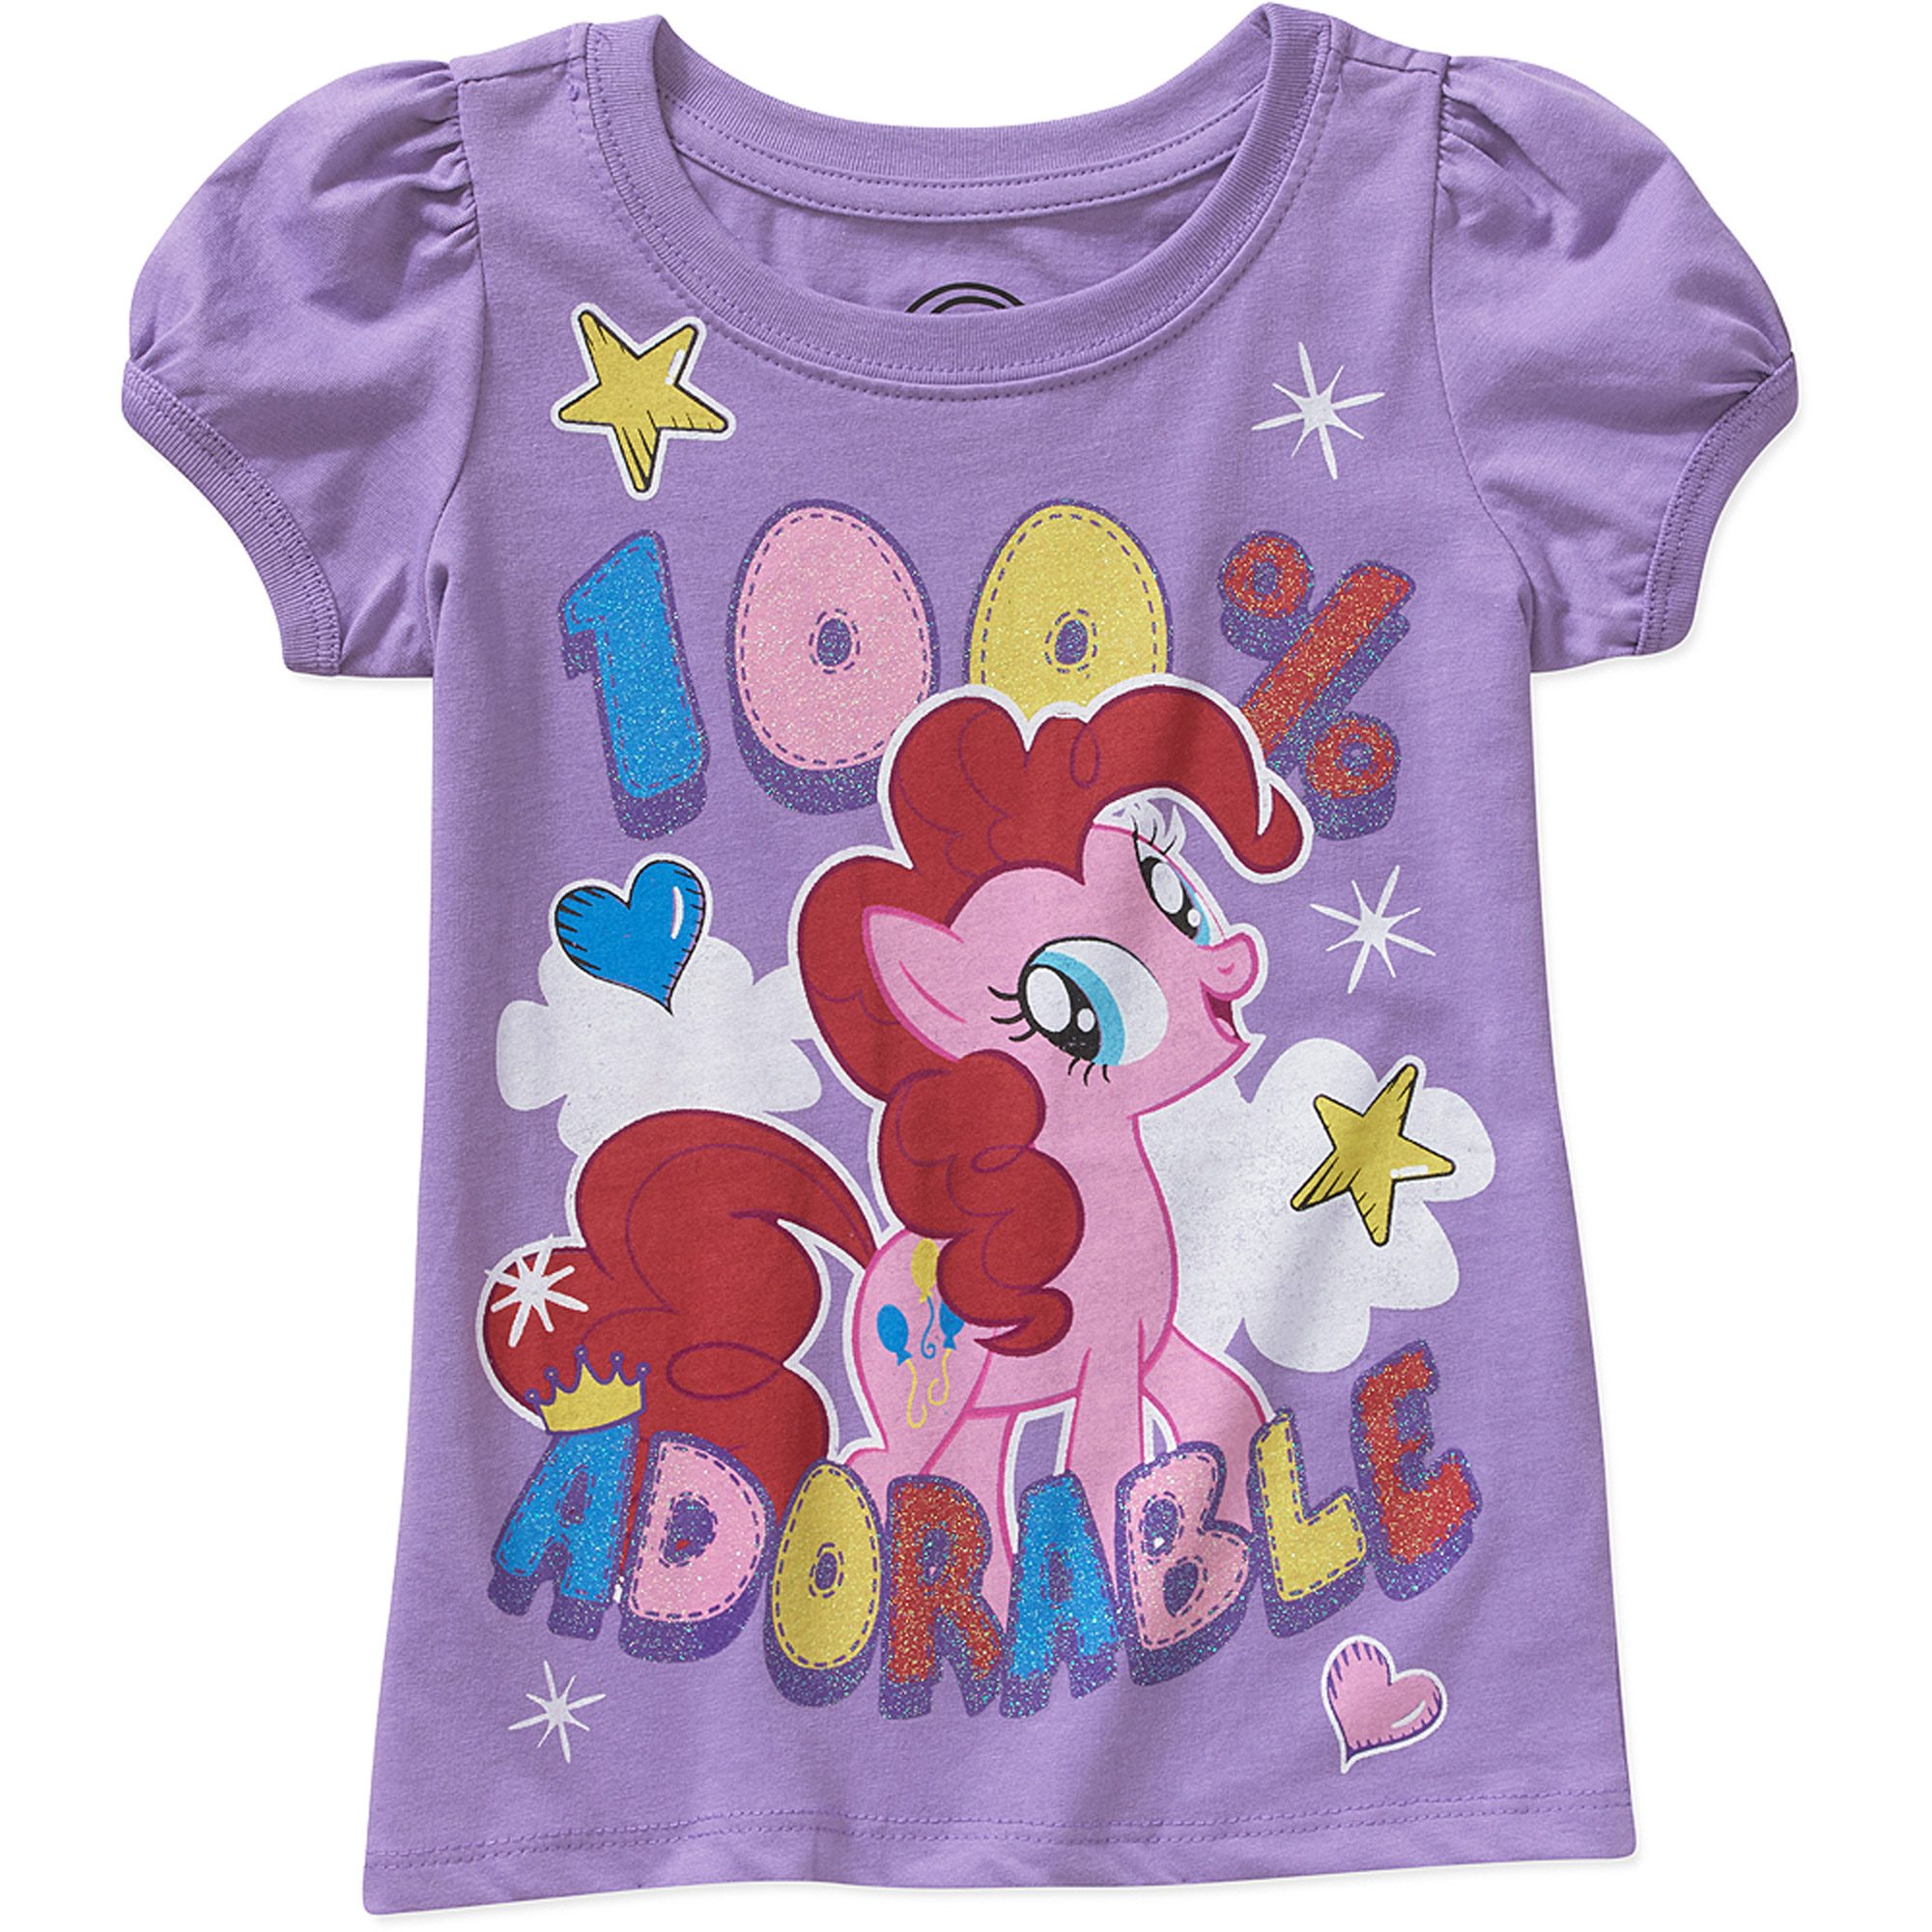 My Little Pony 100% Adorable Toddler Gir - image 1 of 1